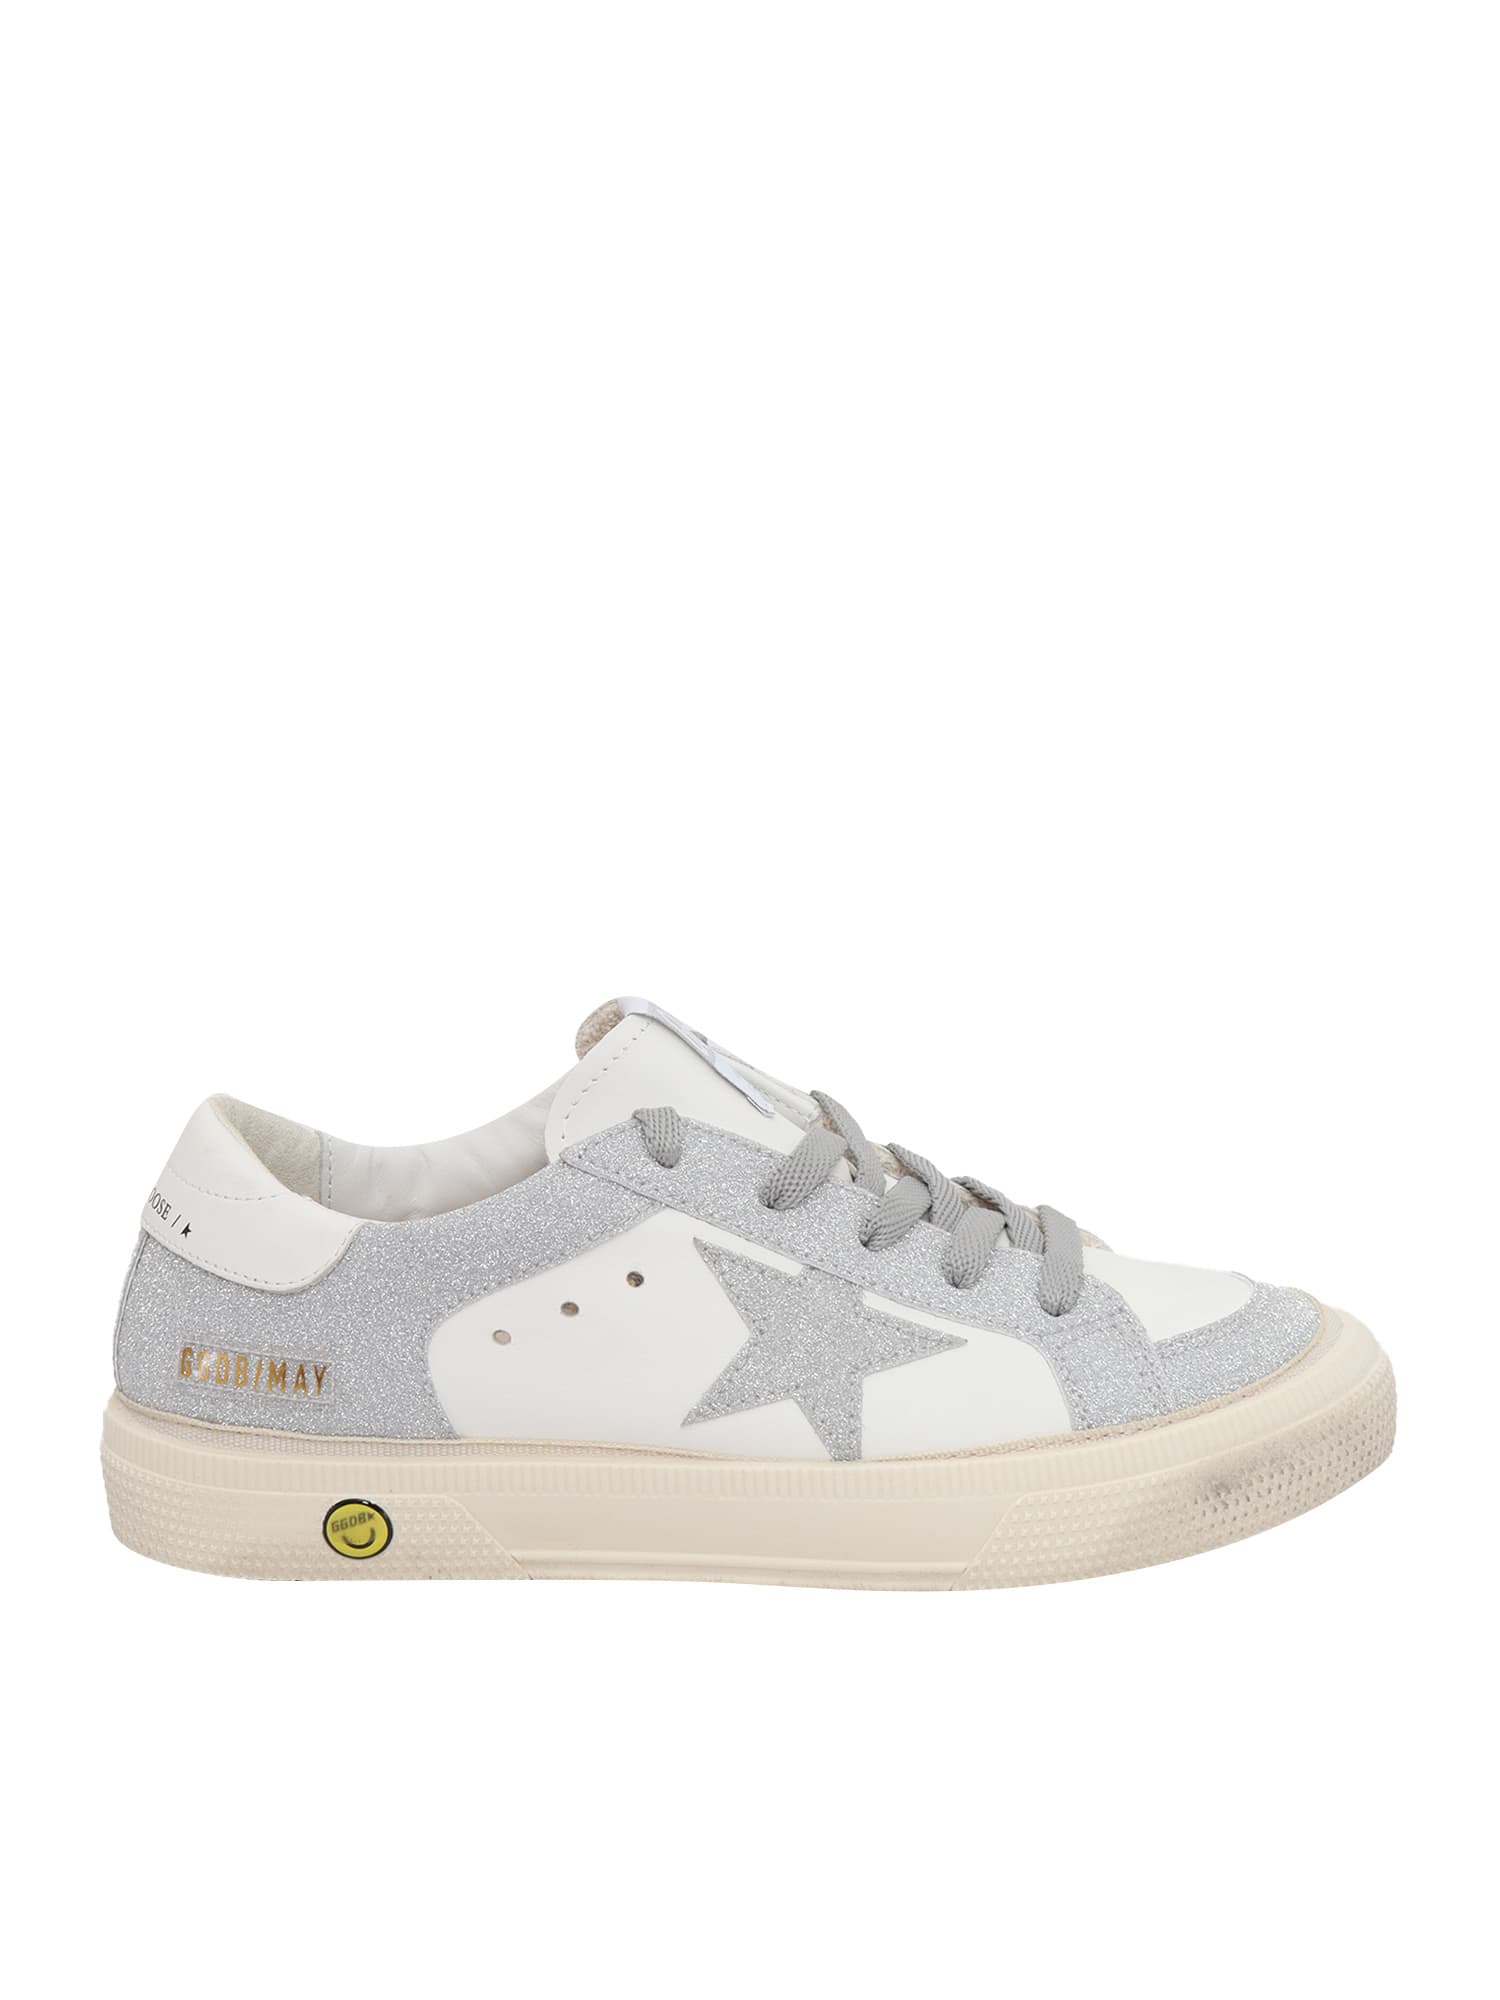 Golden Goose Sneakers May Glitter